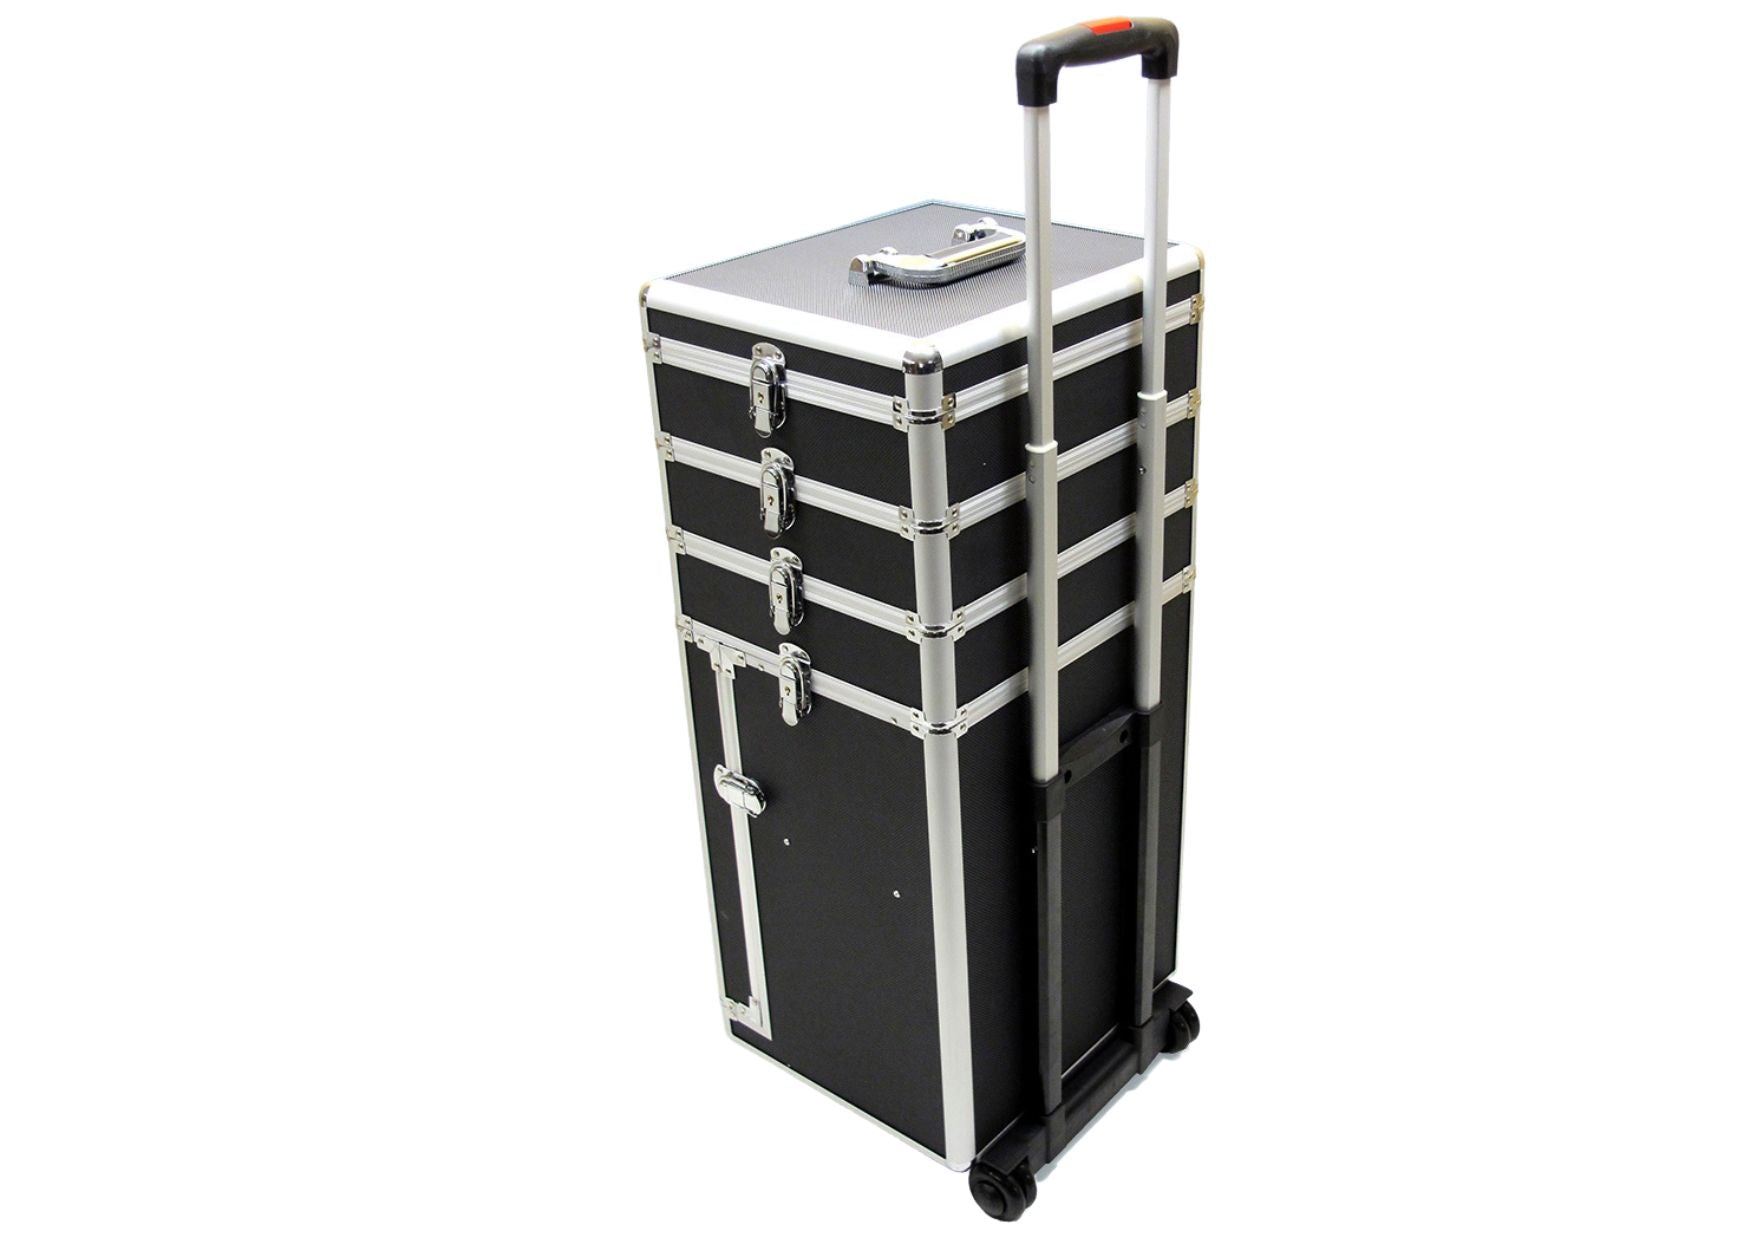 Suitcase trolley in black, dimensions 340 x 370 x 740 mm - 0